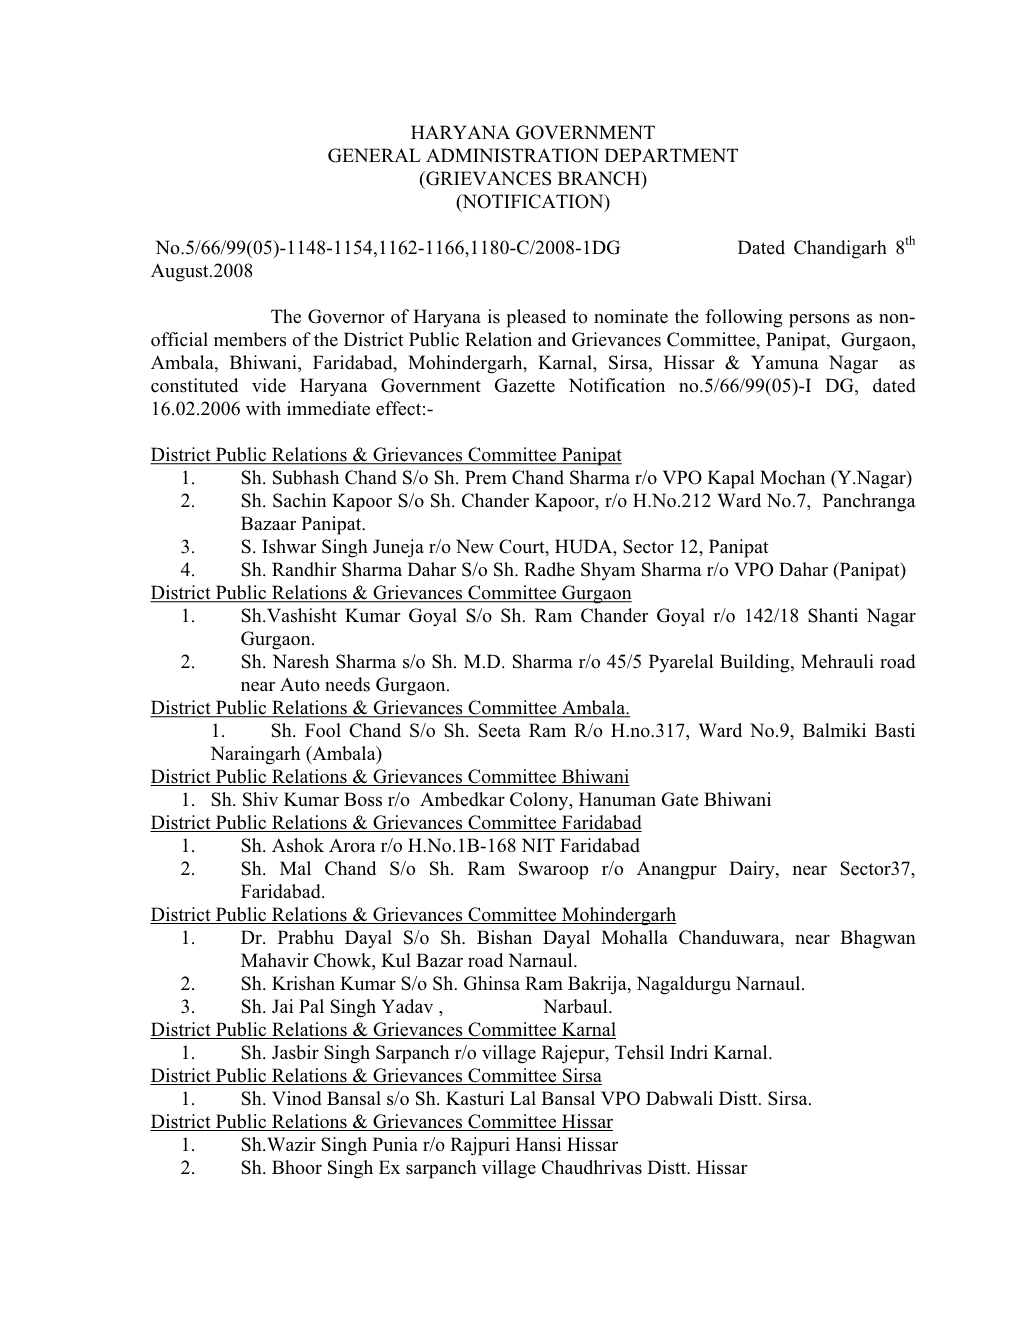 Haryana Government General Administration Department (Grievances Branch) (Notification)